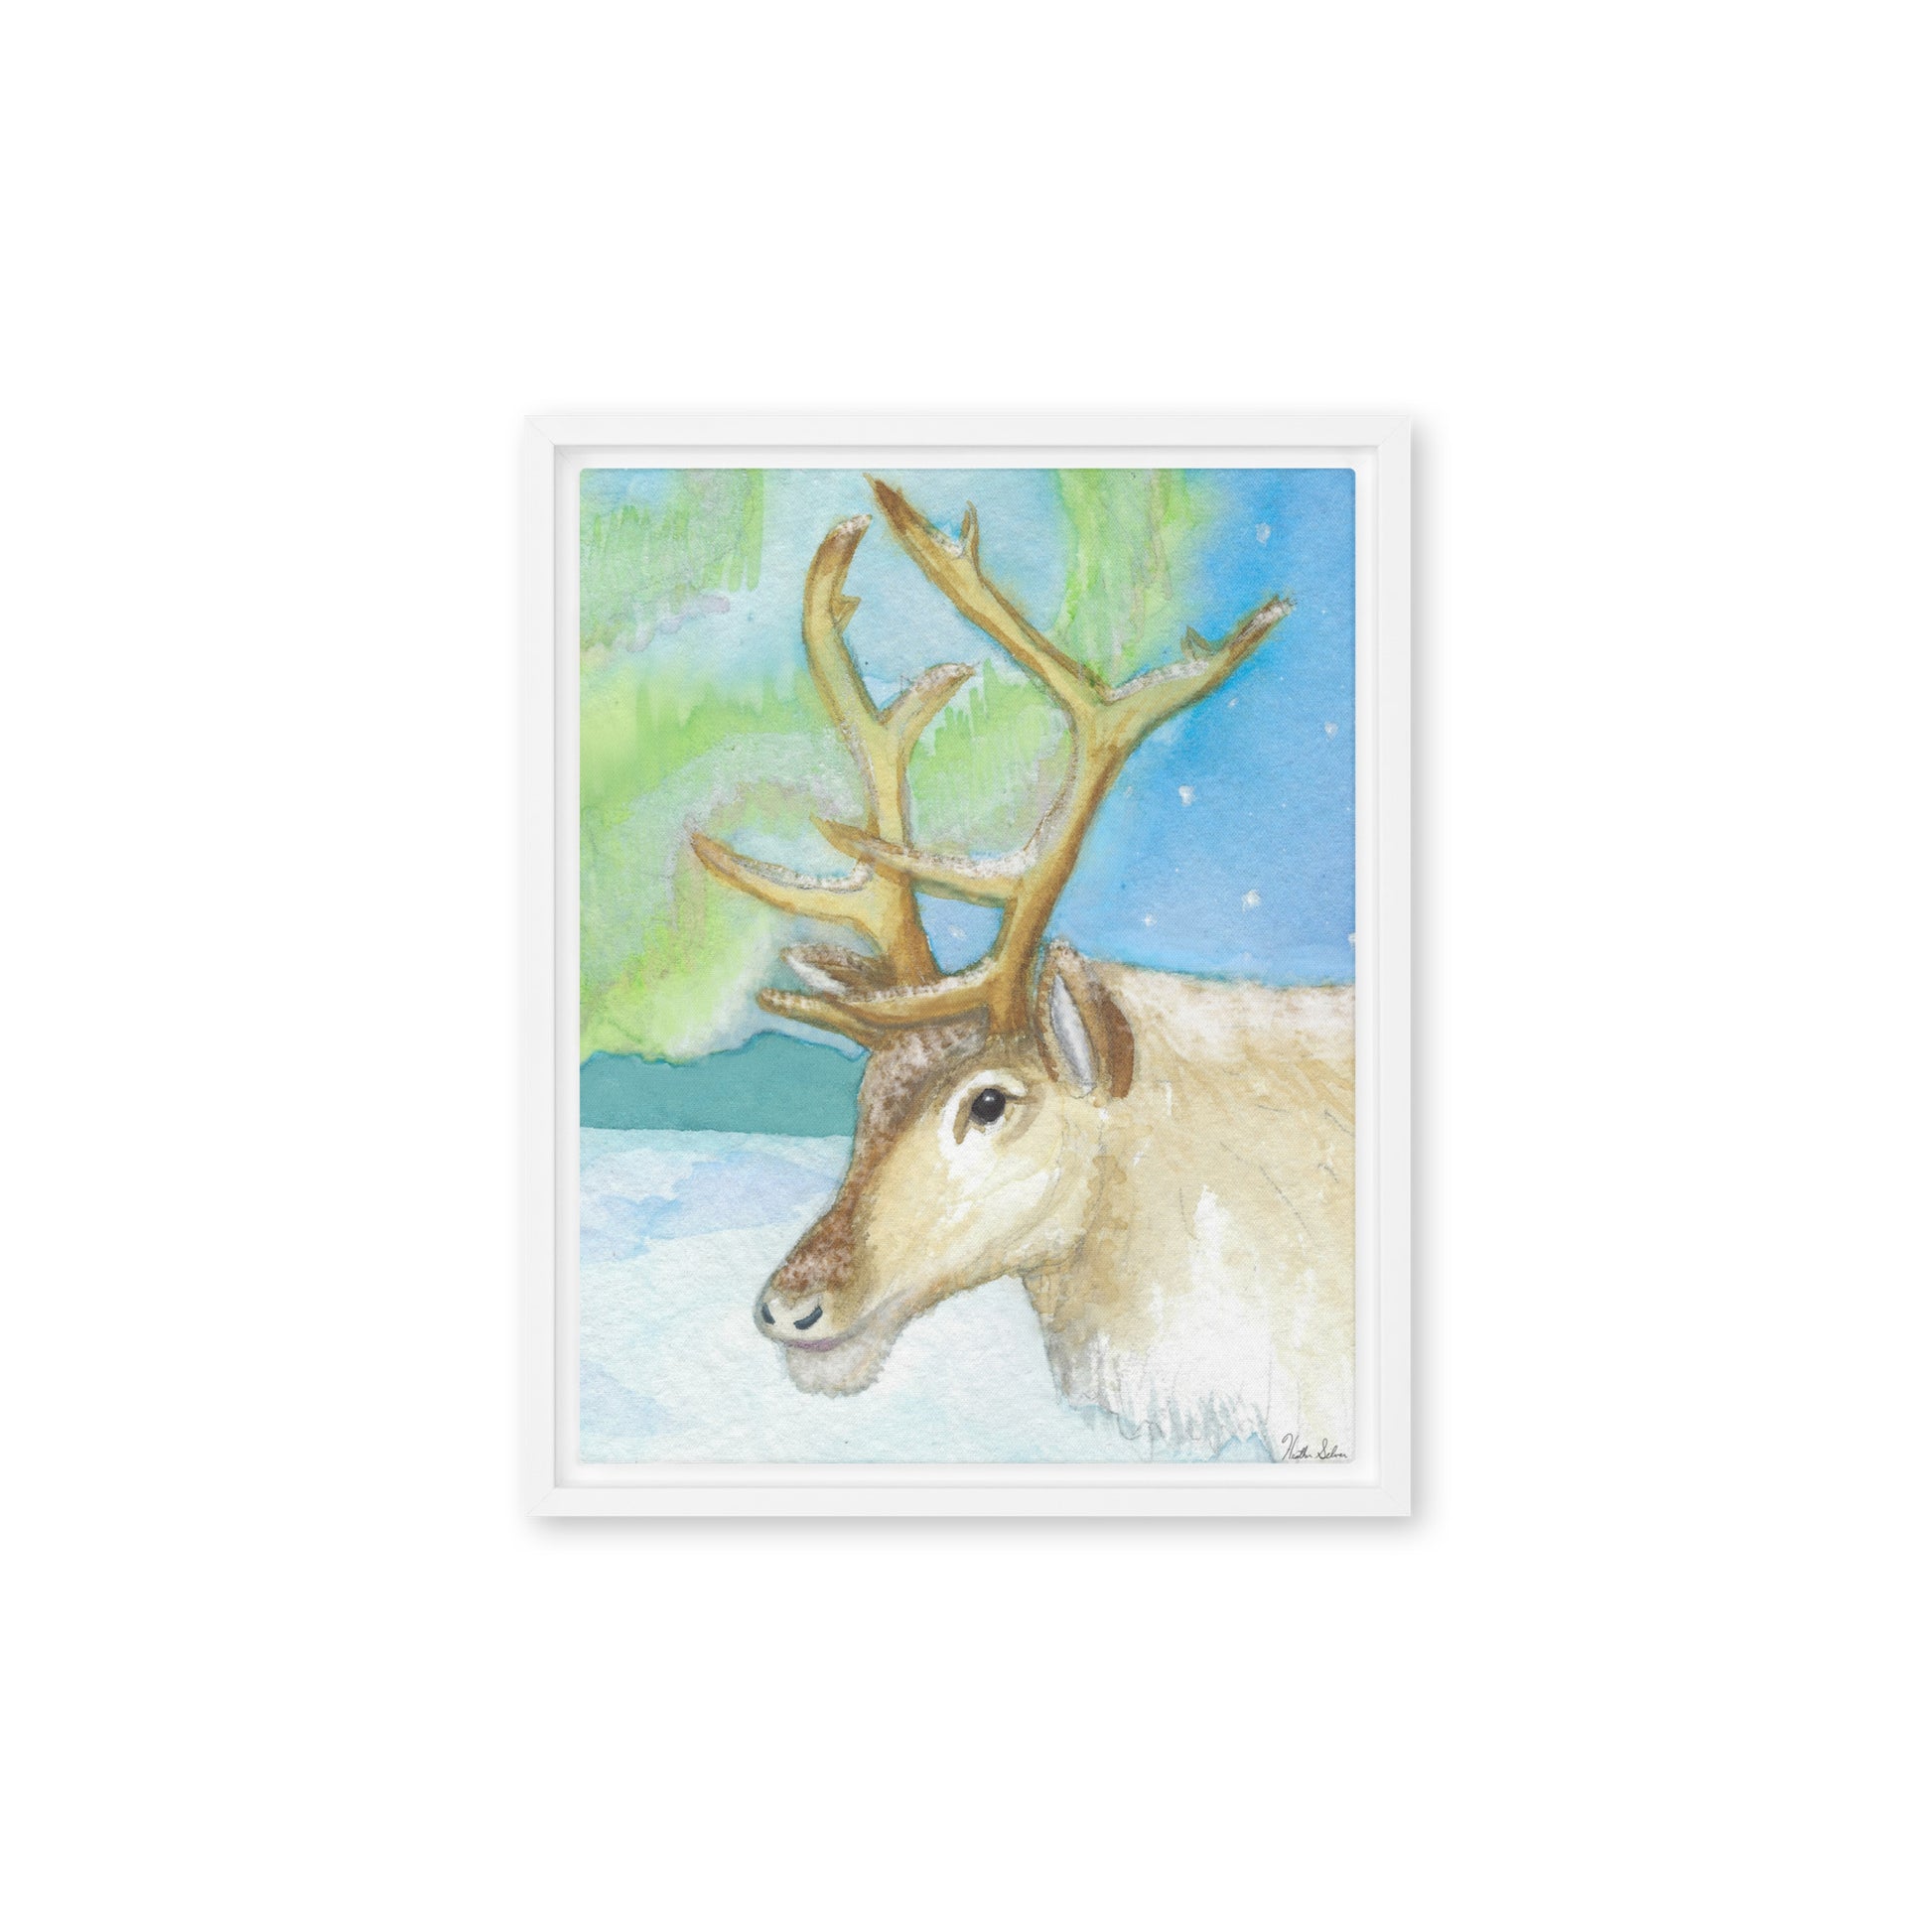 11 by 14 inch framed canvas art print of Heather Silver's Northern Lights Reindeer.  Canvas print mounted in a white pine frame. Hanging hardware included.